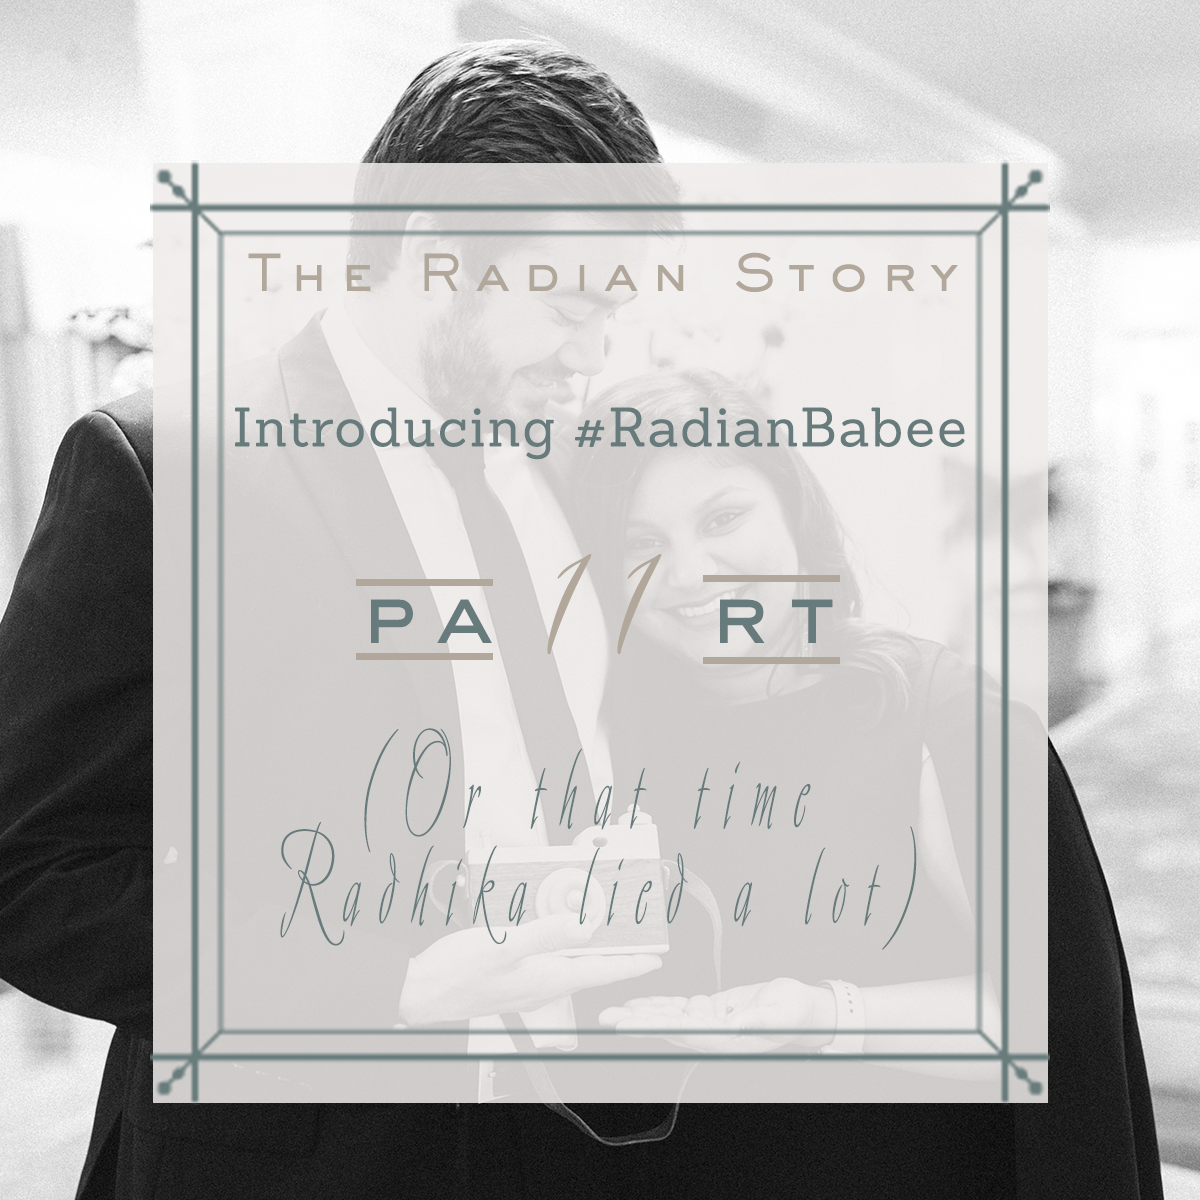 The Radian Story